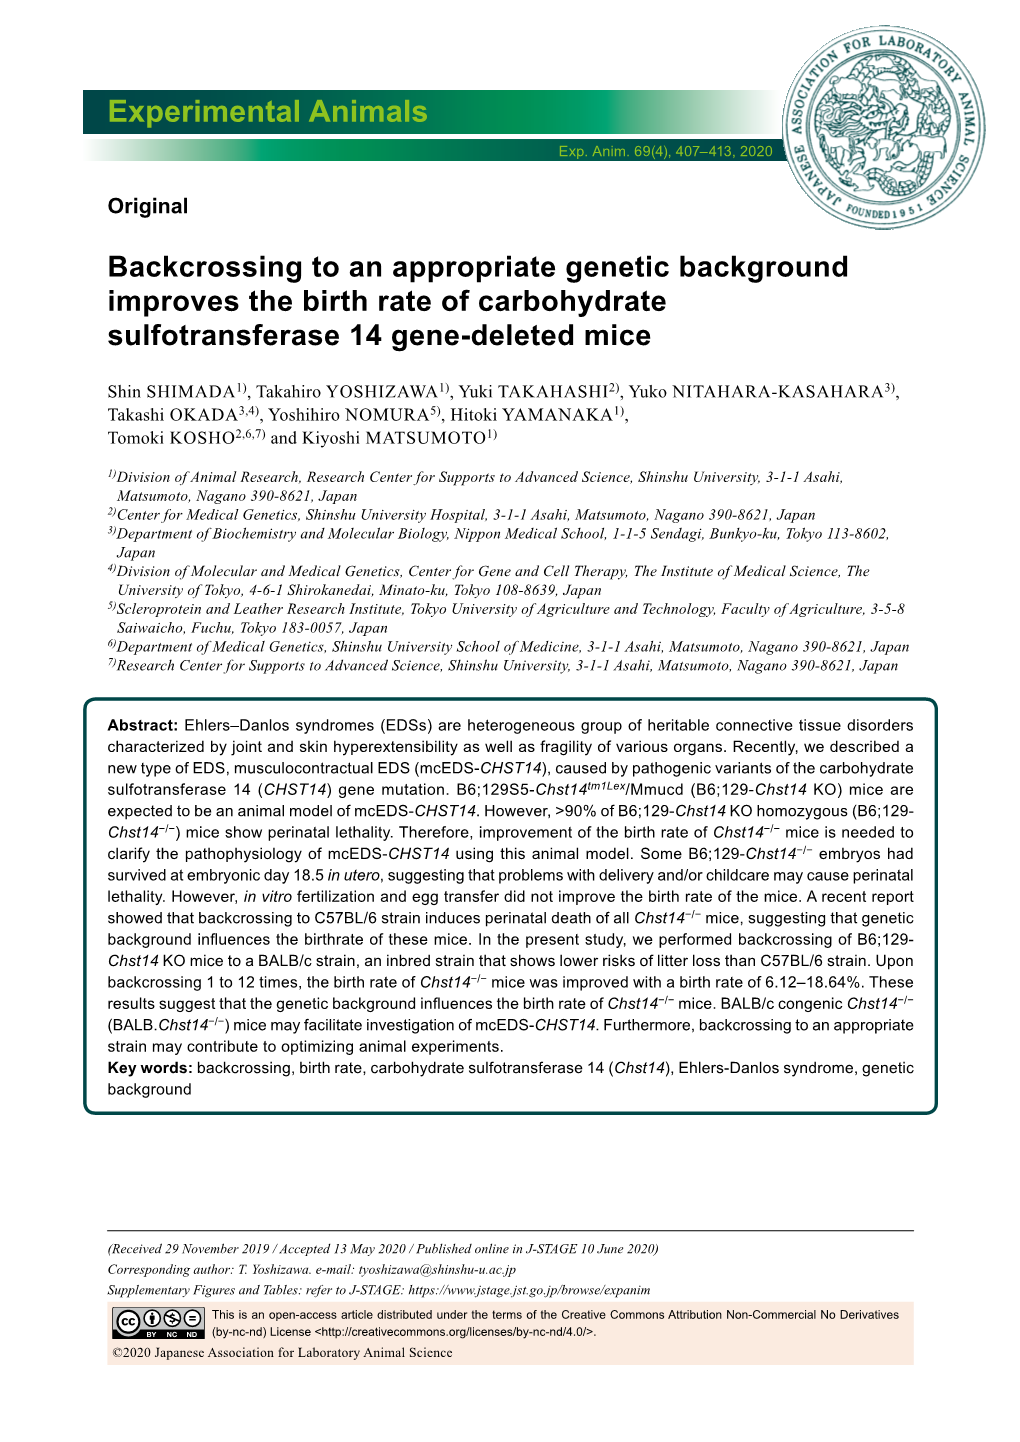 Backcrossing to an Appropriate Genetic Background Improves the Birth Rate of Carbohydrate Sulfotransferase 14 Gene-Deleted Mice